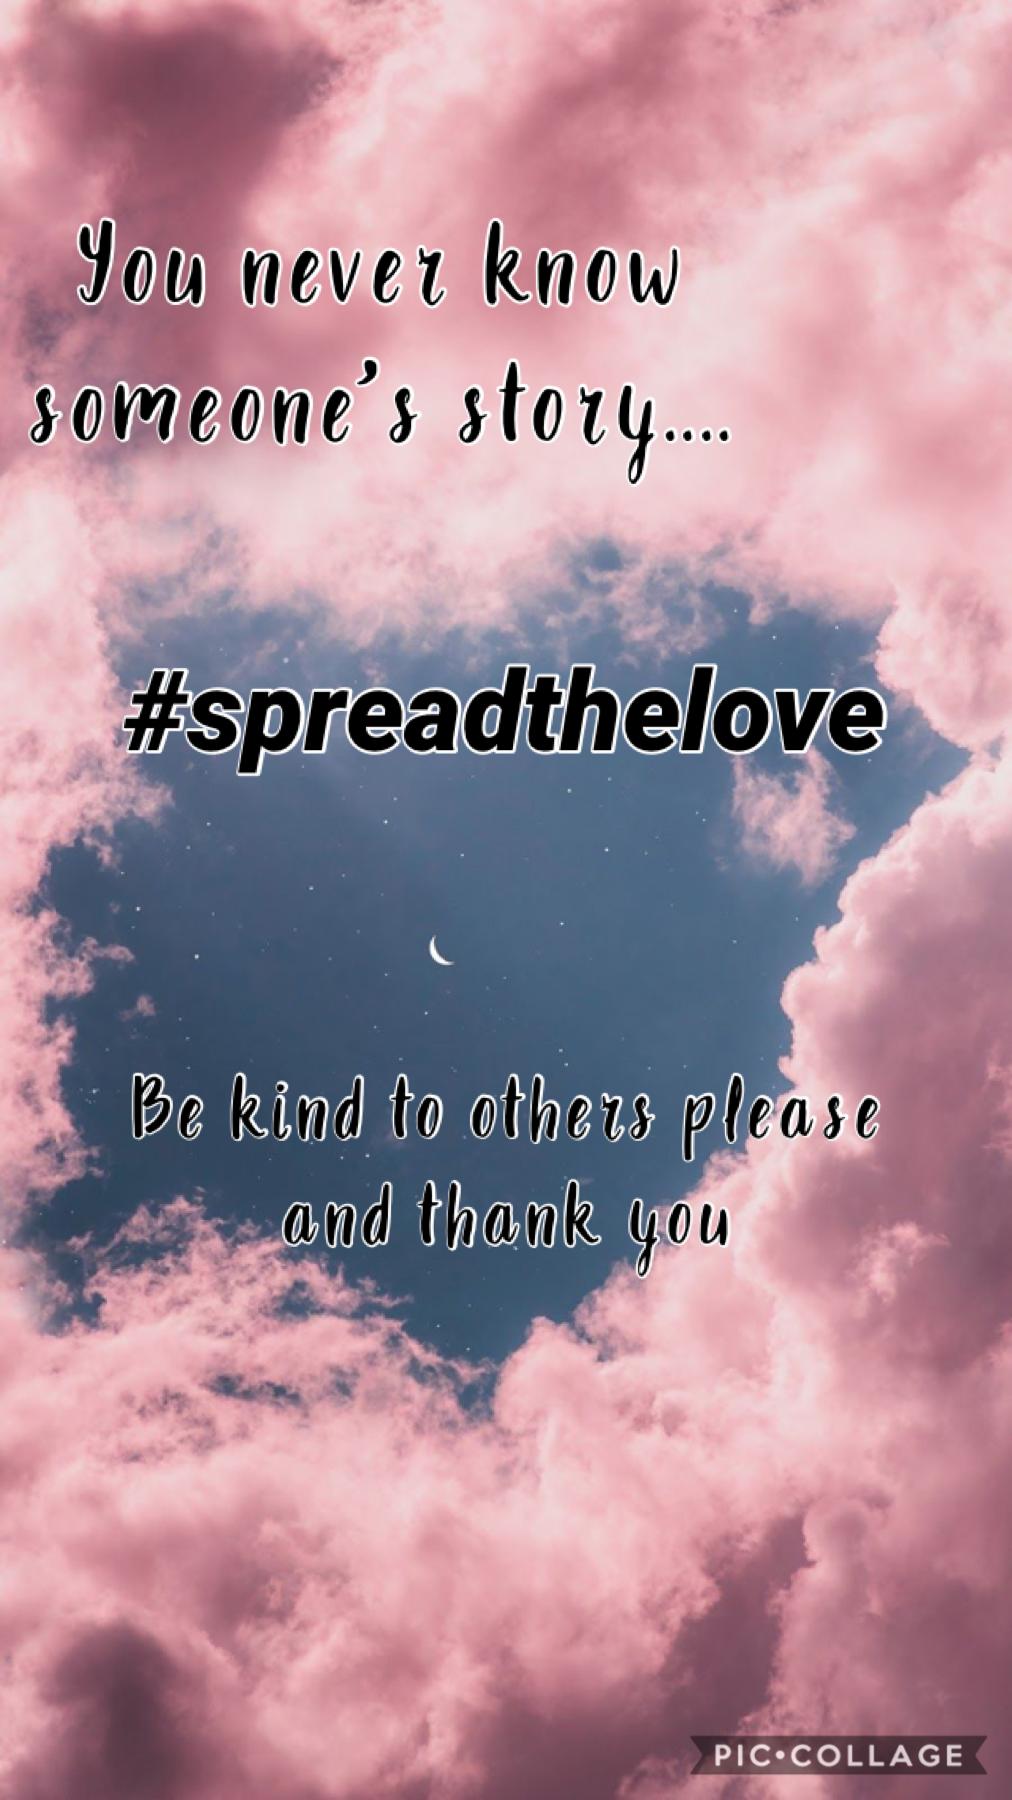 #spreadthelove ~Tap~

I see people bring other people bringing others down all the time, even just a small word can have a big impact. Be kind and Spread The Love 💗 